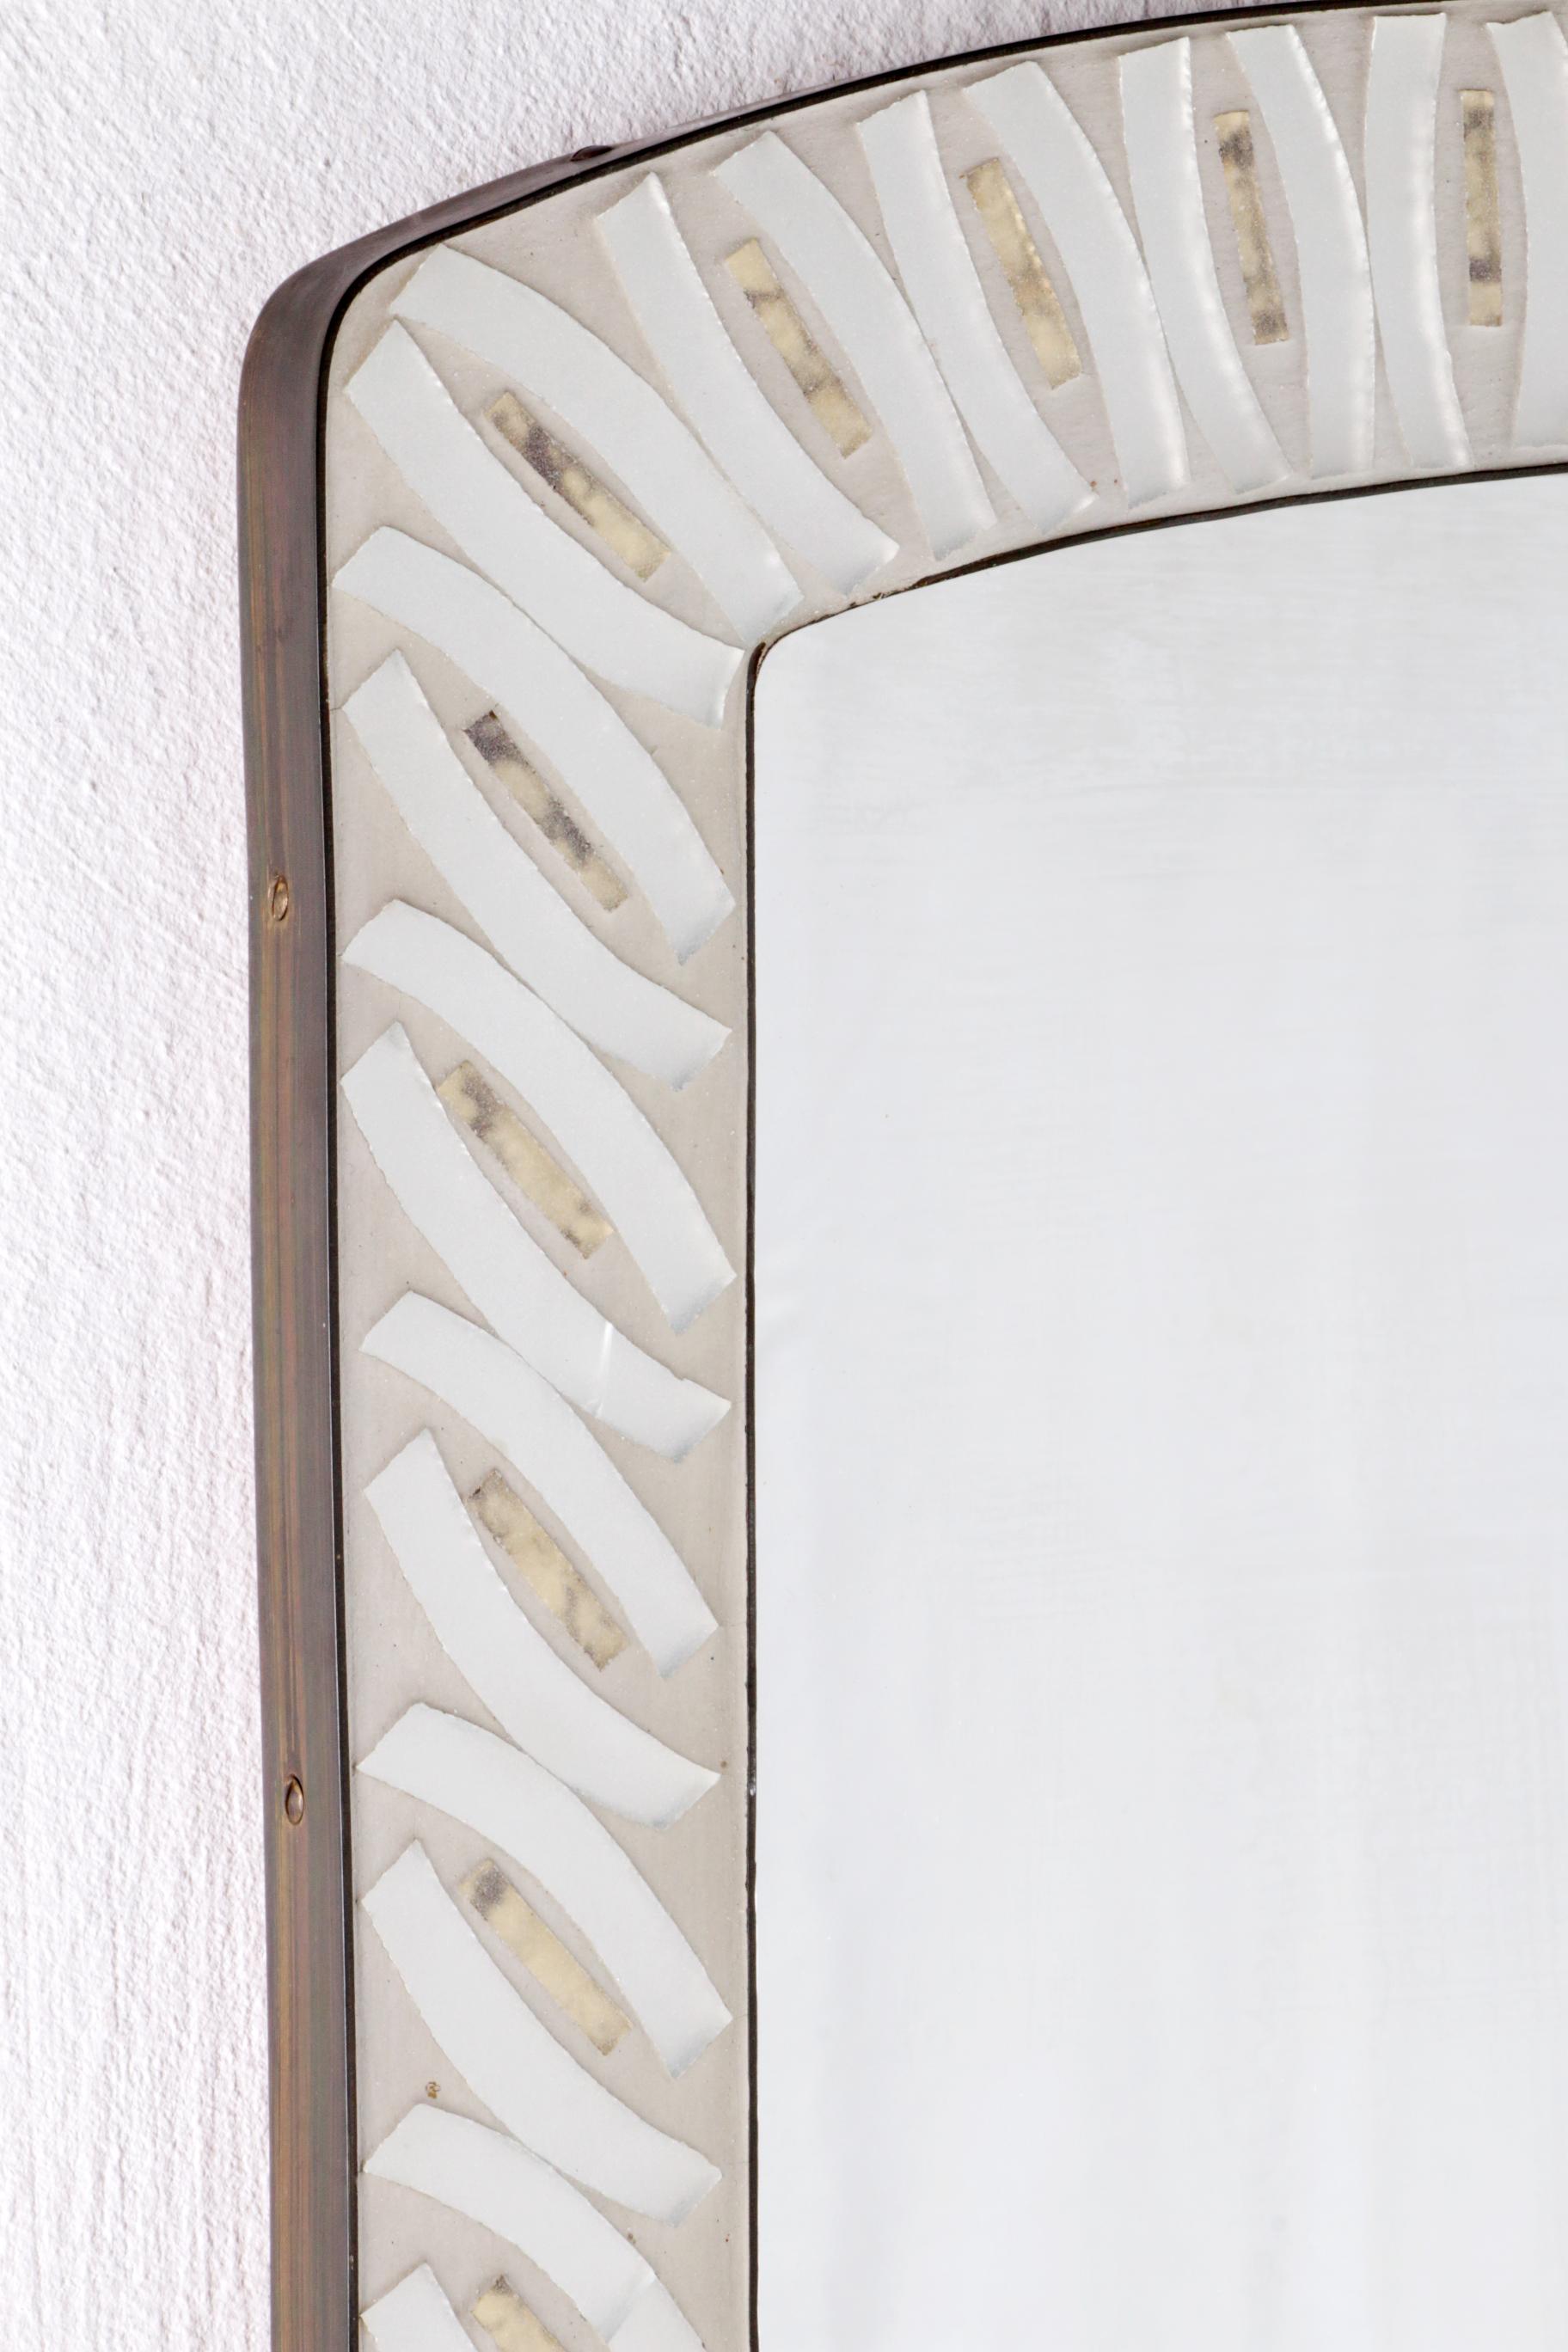 Mid-Century Modern Mosaic Wall Mirror by Berthold Müller Oerlinghausen, 1950 For Sale